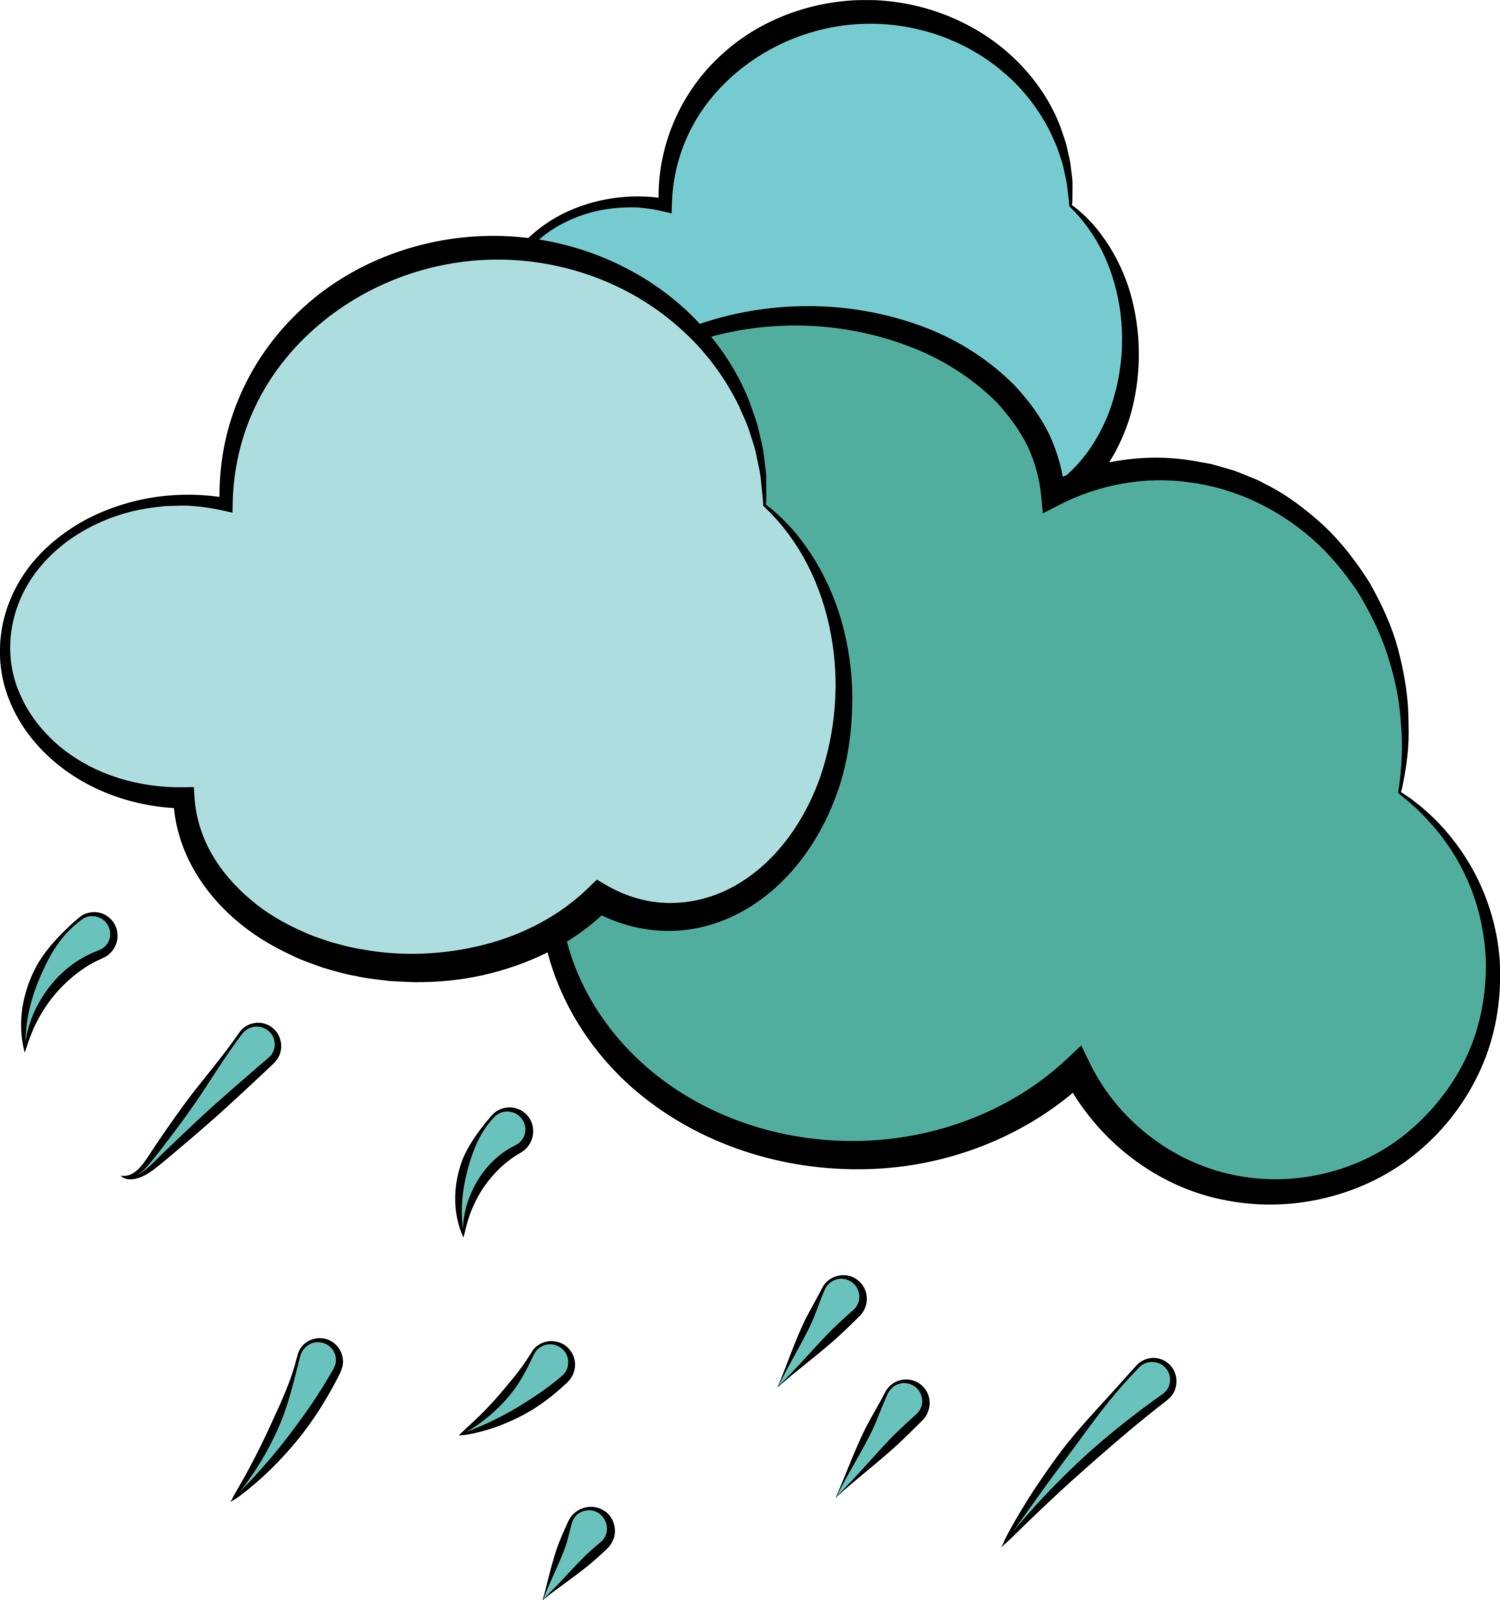 Heavy downpour from a cloudy sky depicting the rainy weather vector color drawing or illustration 